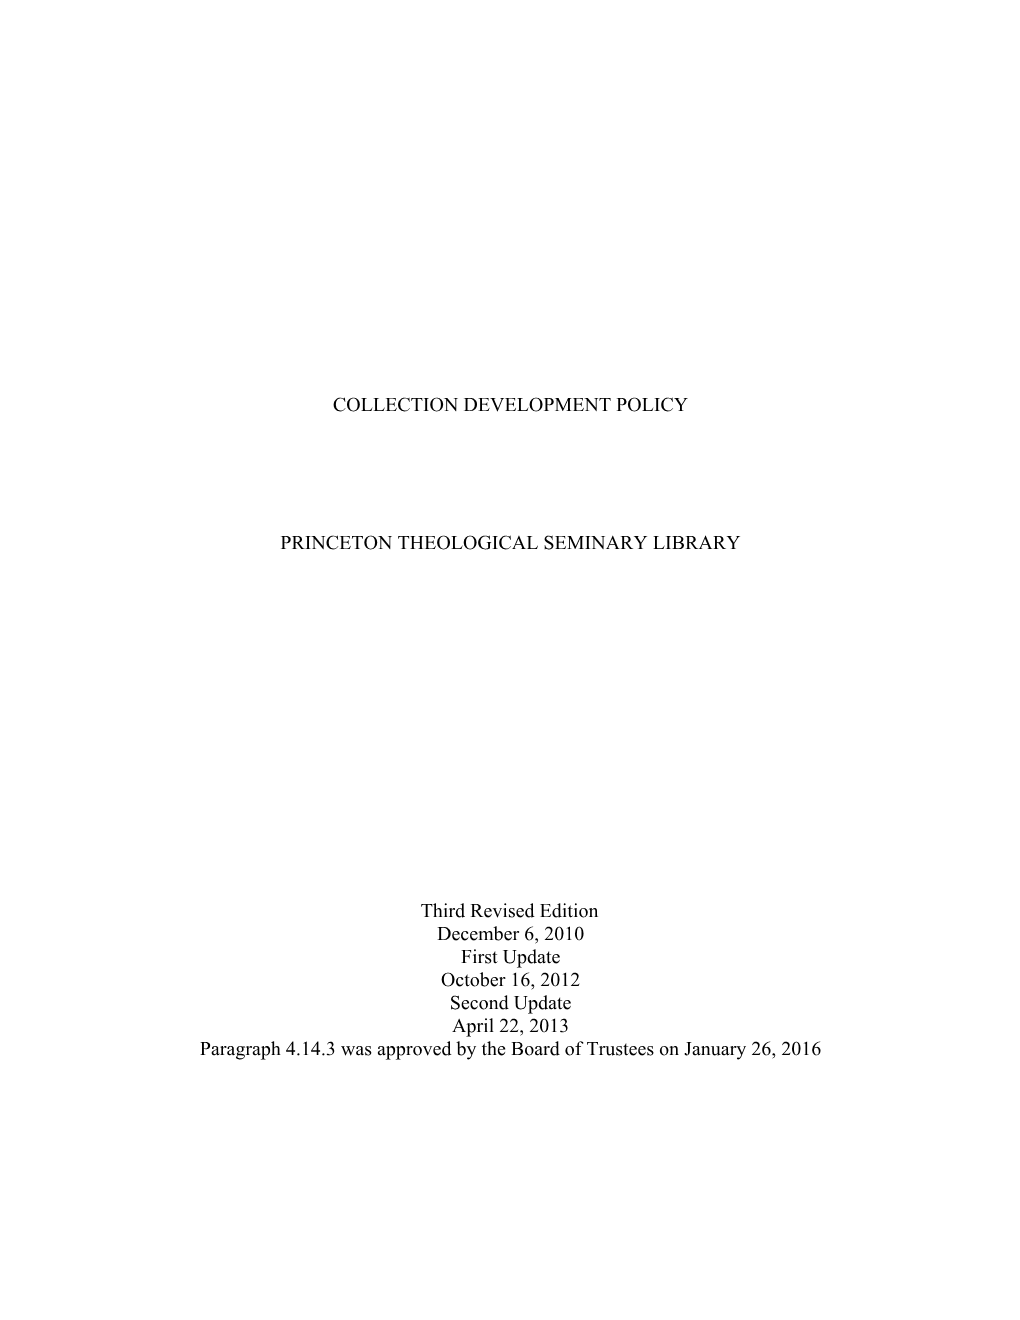 Collection Development Policy Document